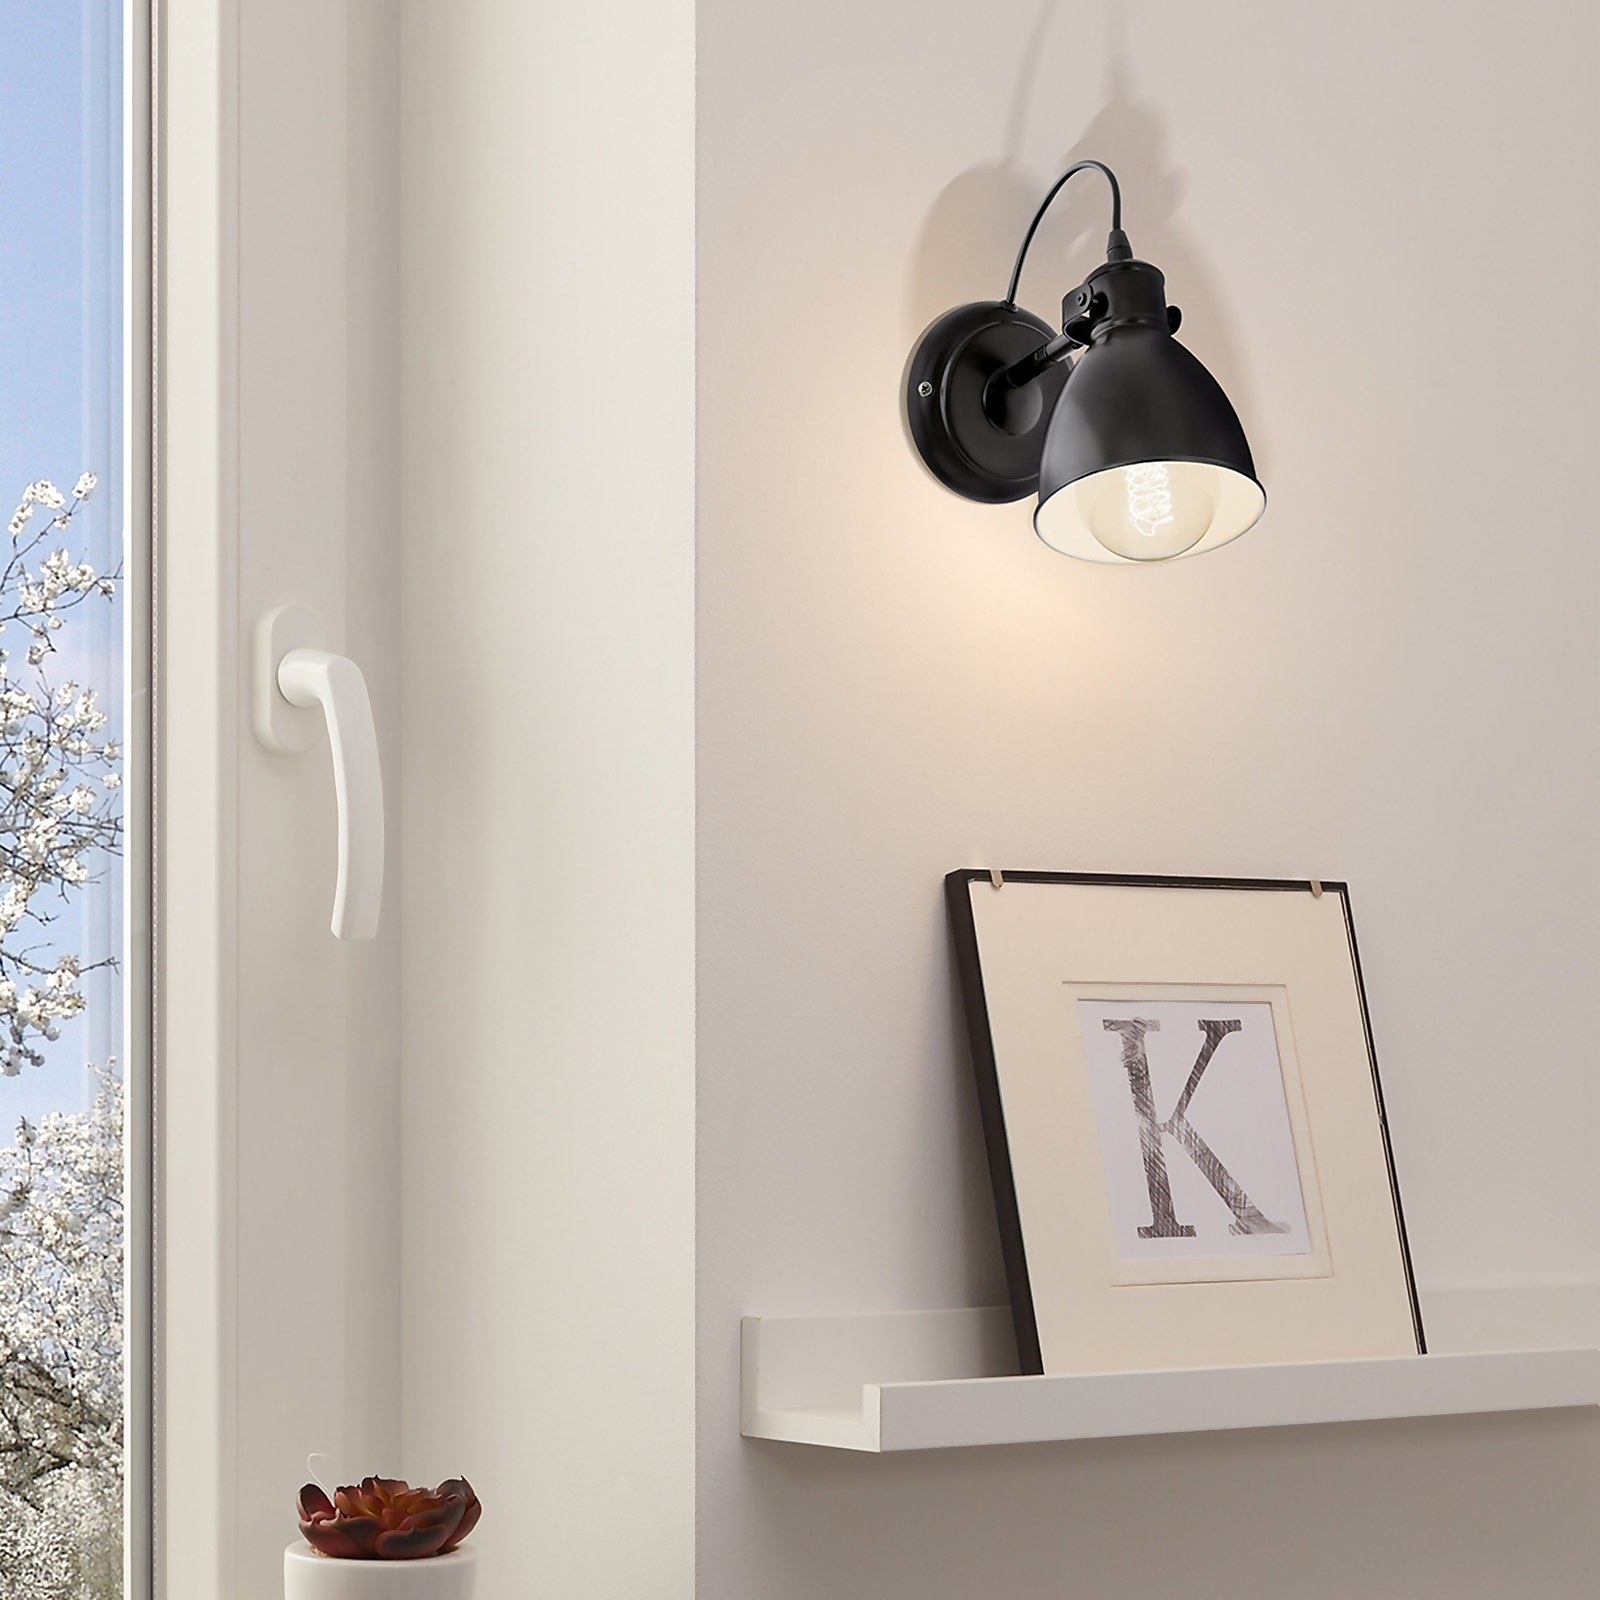 Photo of Eglo Priddy Wall Light - Black